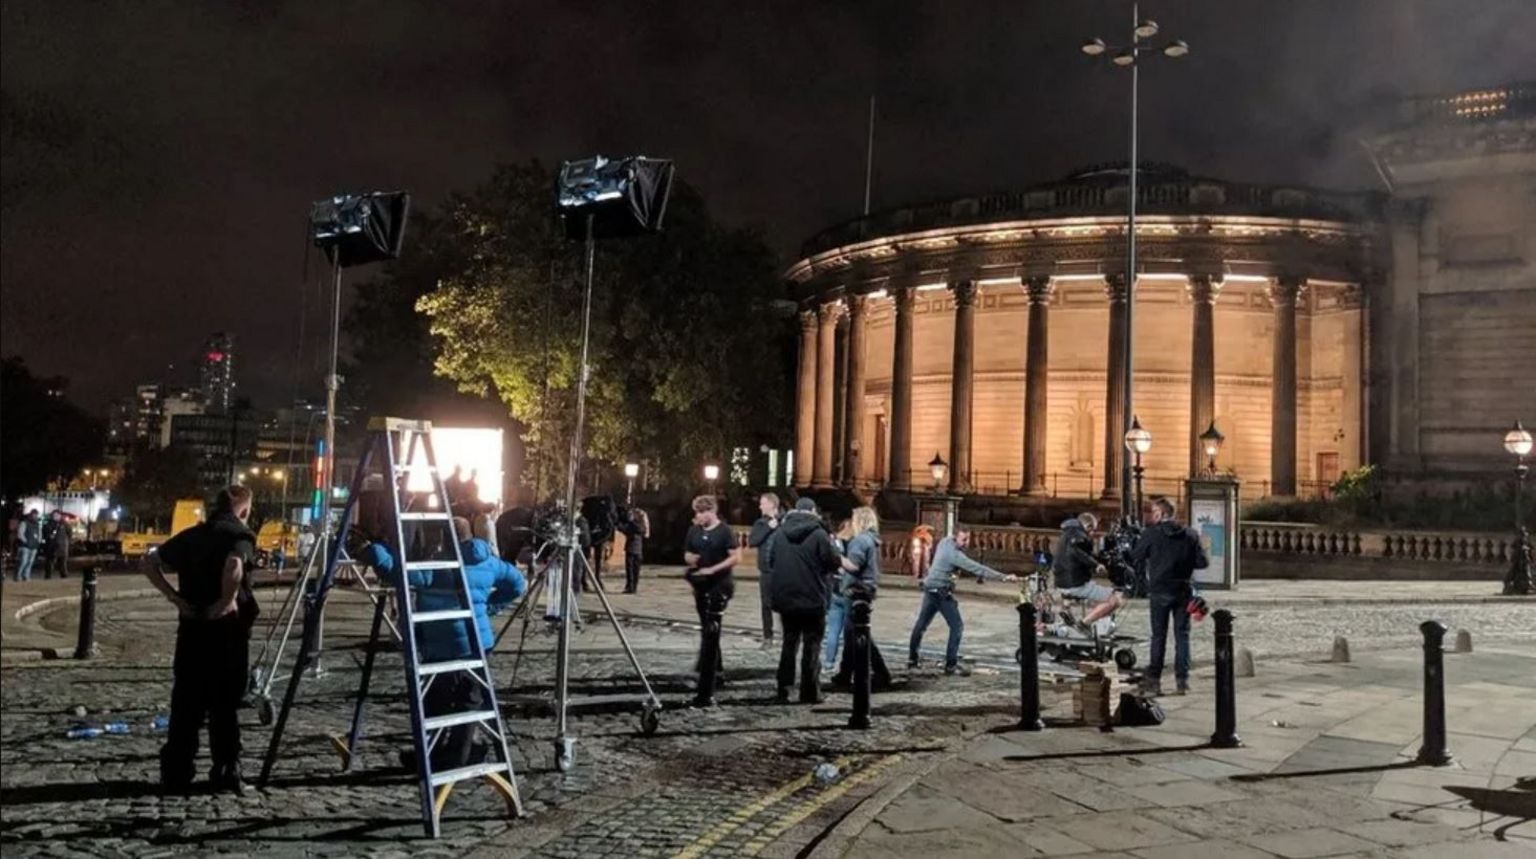 Filming near to Liverpool's St George's Hall